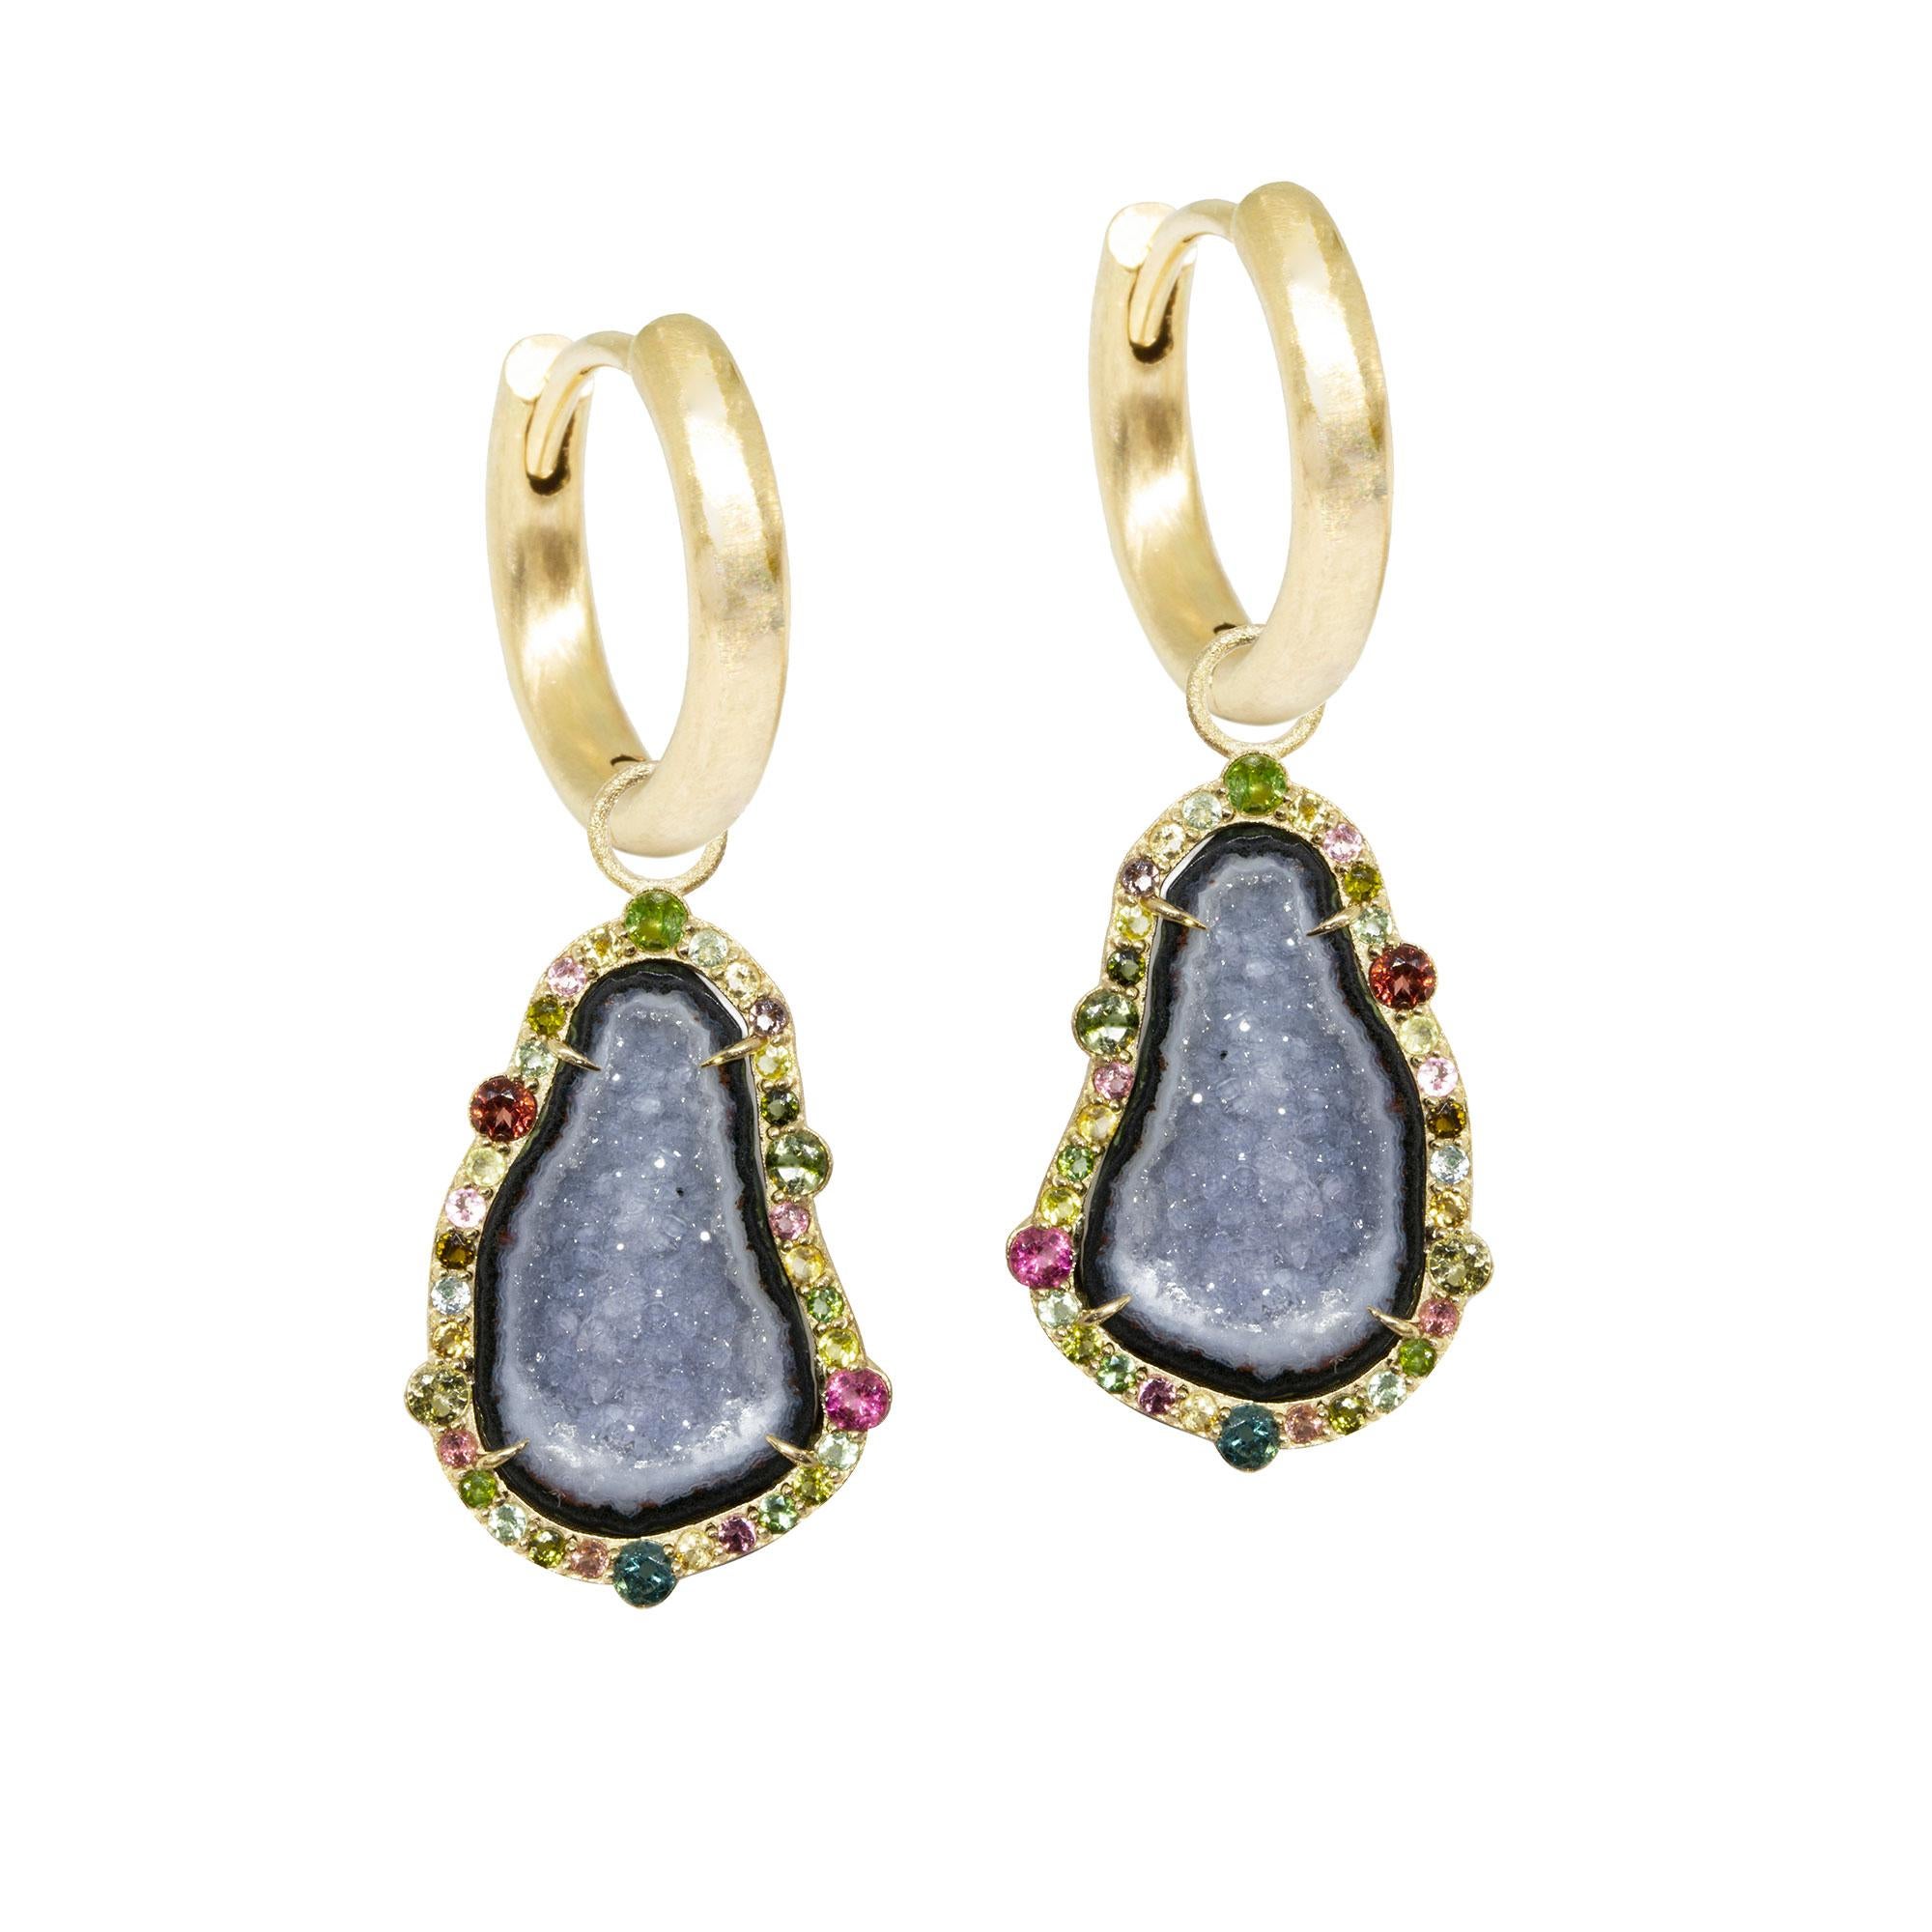 Earthy and unique, our one-of-a-kind Geode Earring Charms adorned with vivid multi tourmalines is a true delight. The intricate and detailed charms change up your style instantly, by giving you a bohemian chic vibe. Pair them with another charm (or